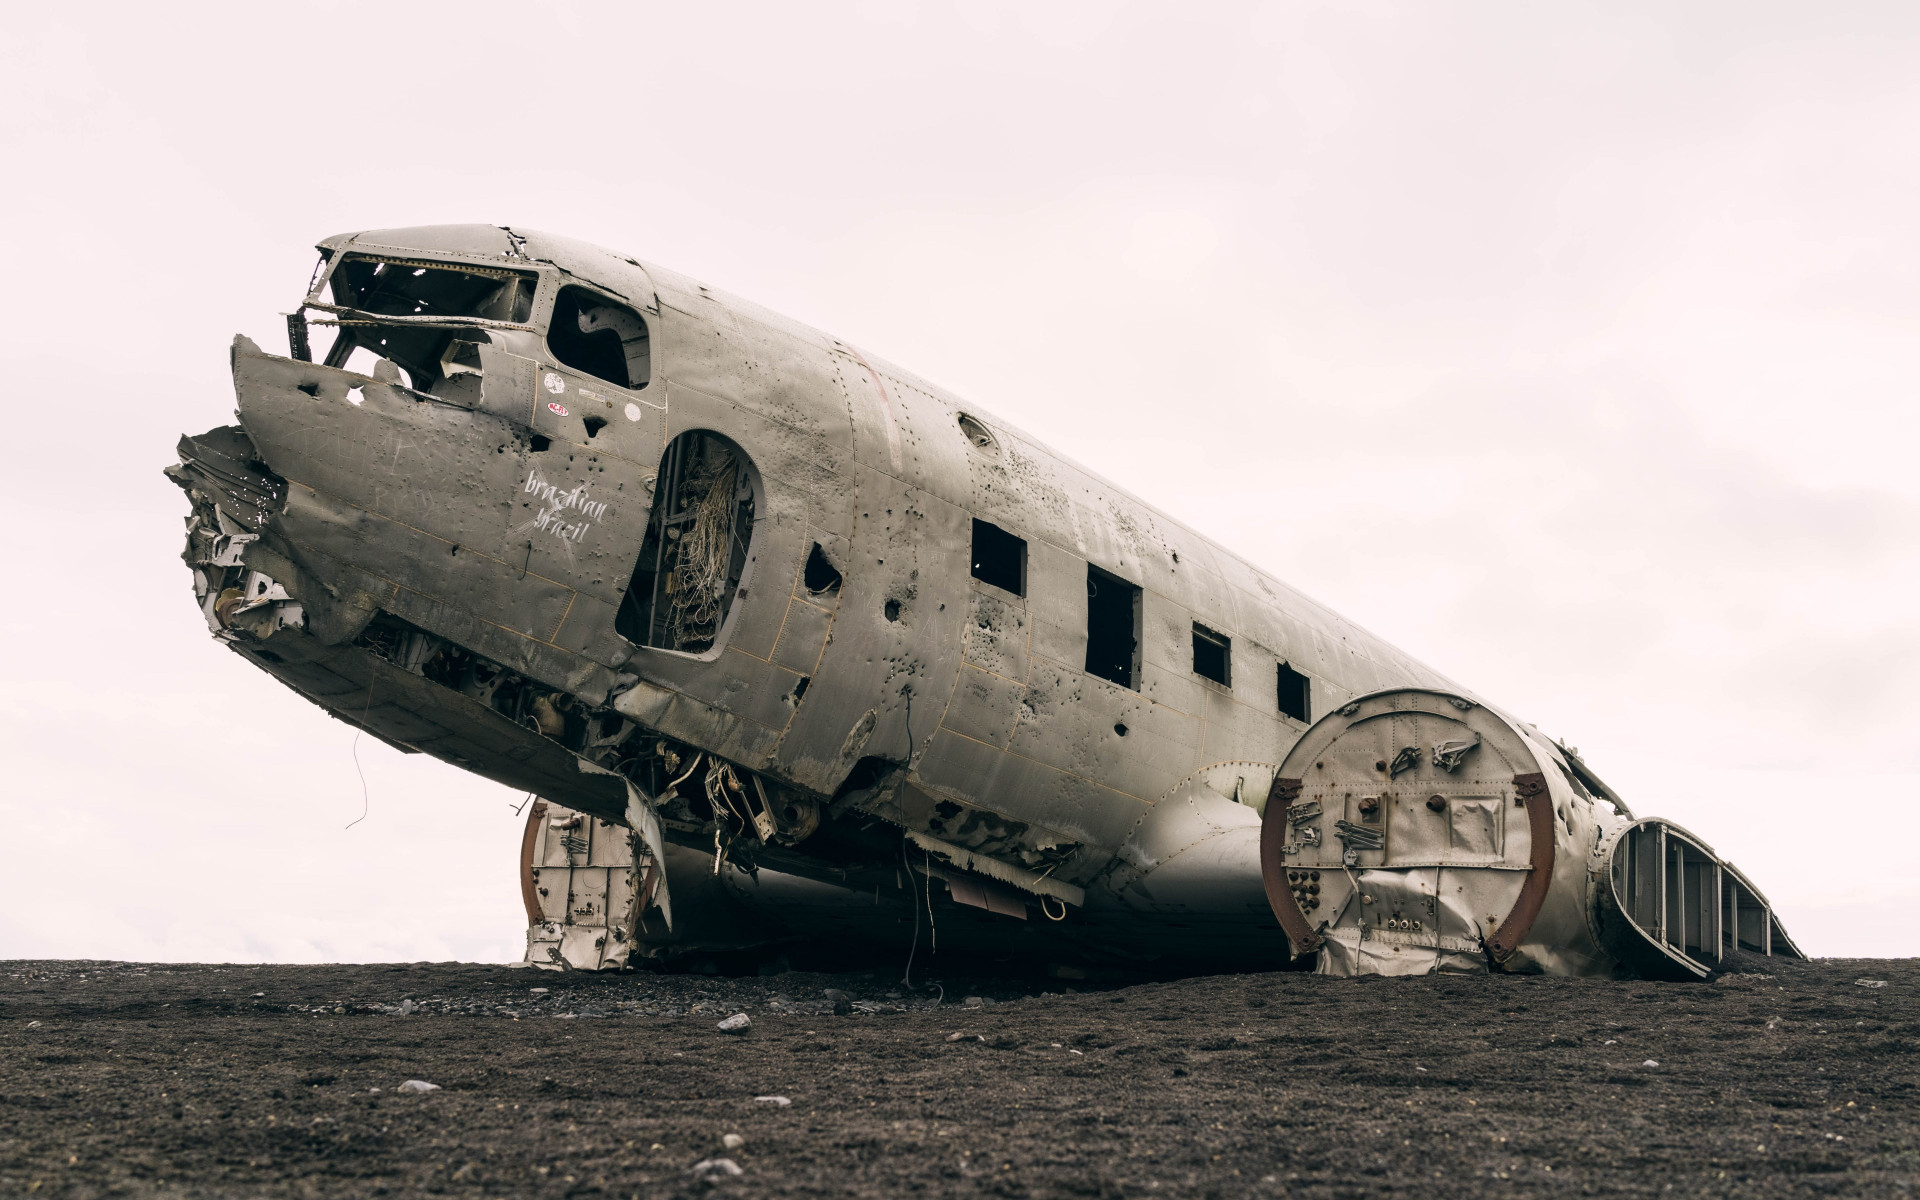 Wrecked airplane wallpaper 1920x1200